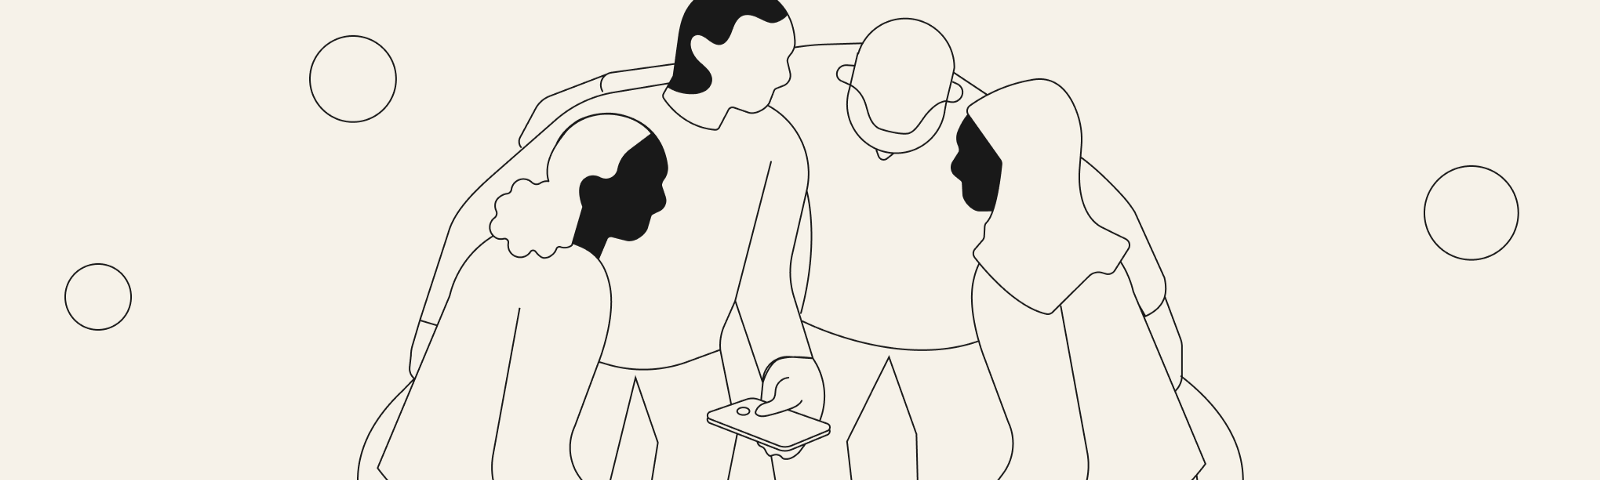 An illustration of a diverse group of people standing together looking at a smartphone.O